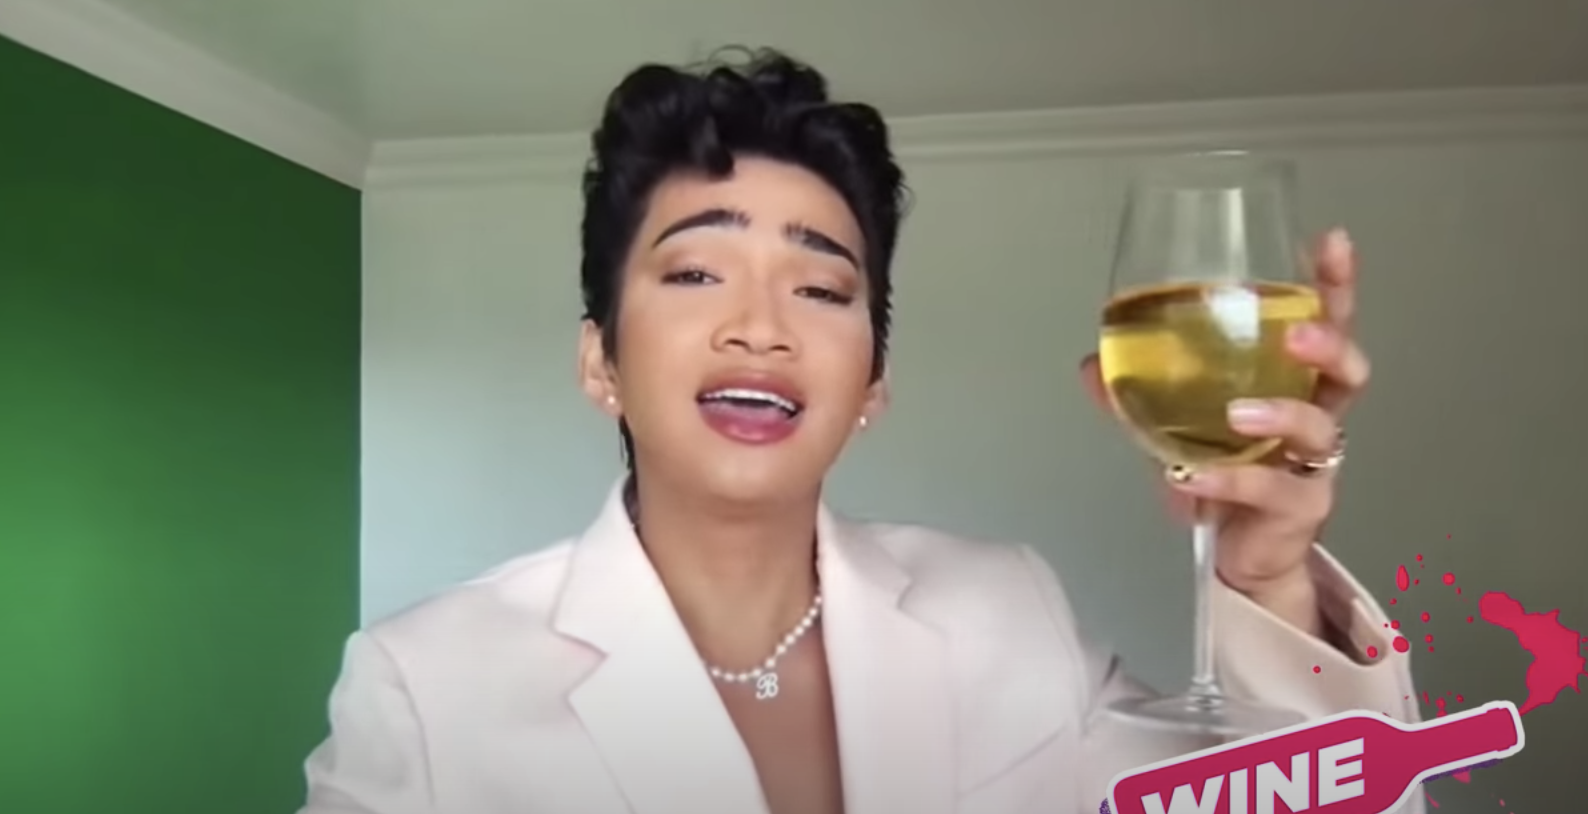 Bretman playing &quot;Truth or Wine&quot;